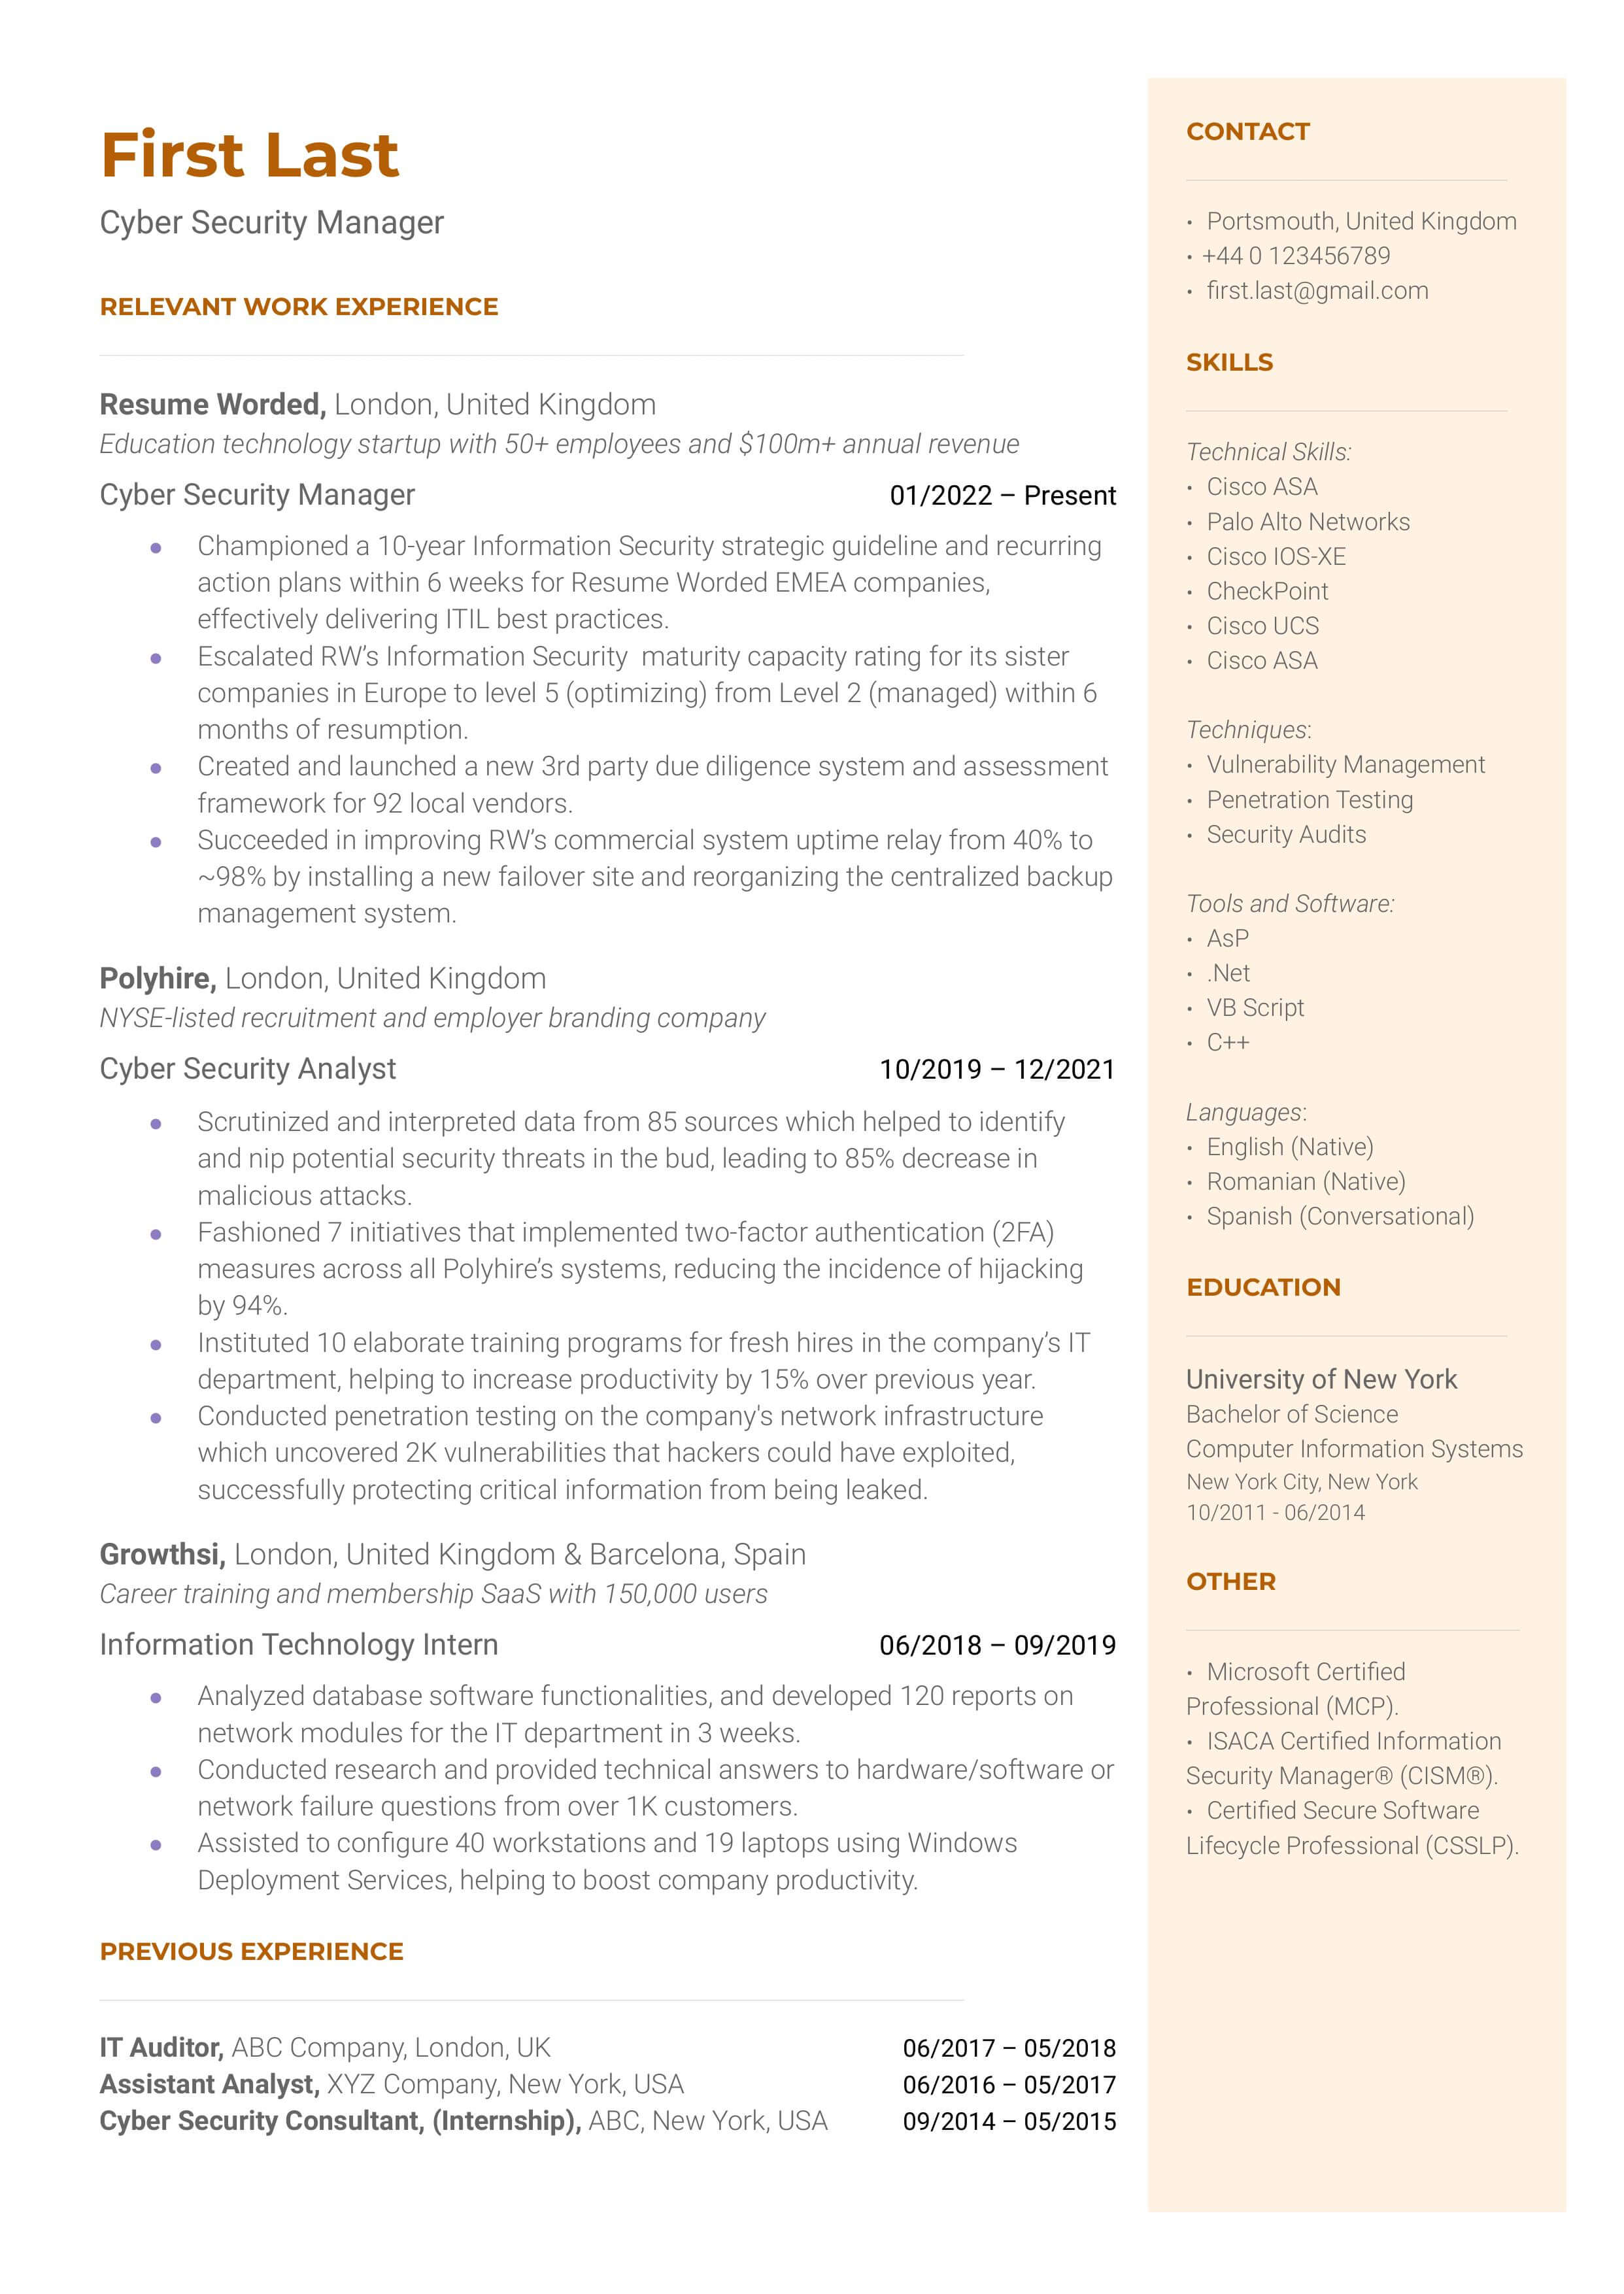 A Cyber Security Manager's CV showcasing industry certifications and risk management strategy.